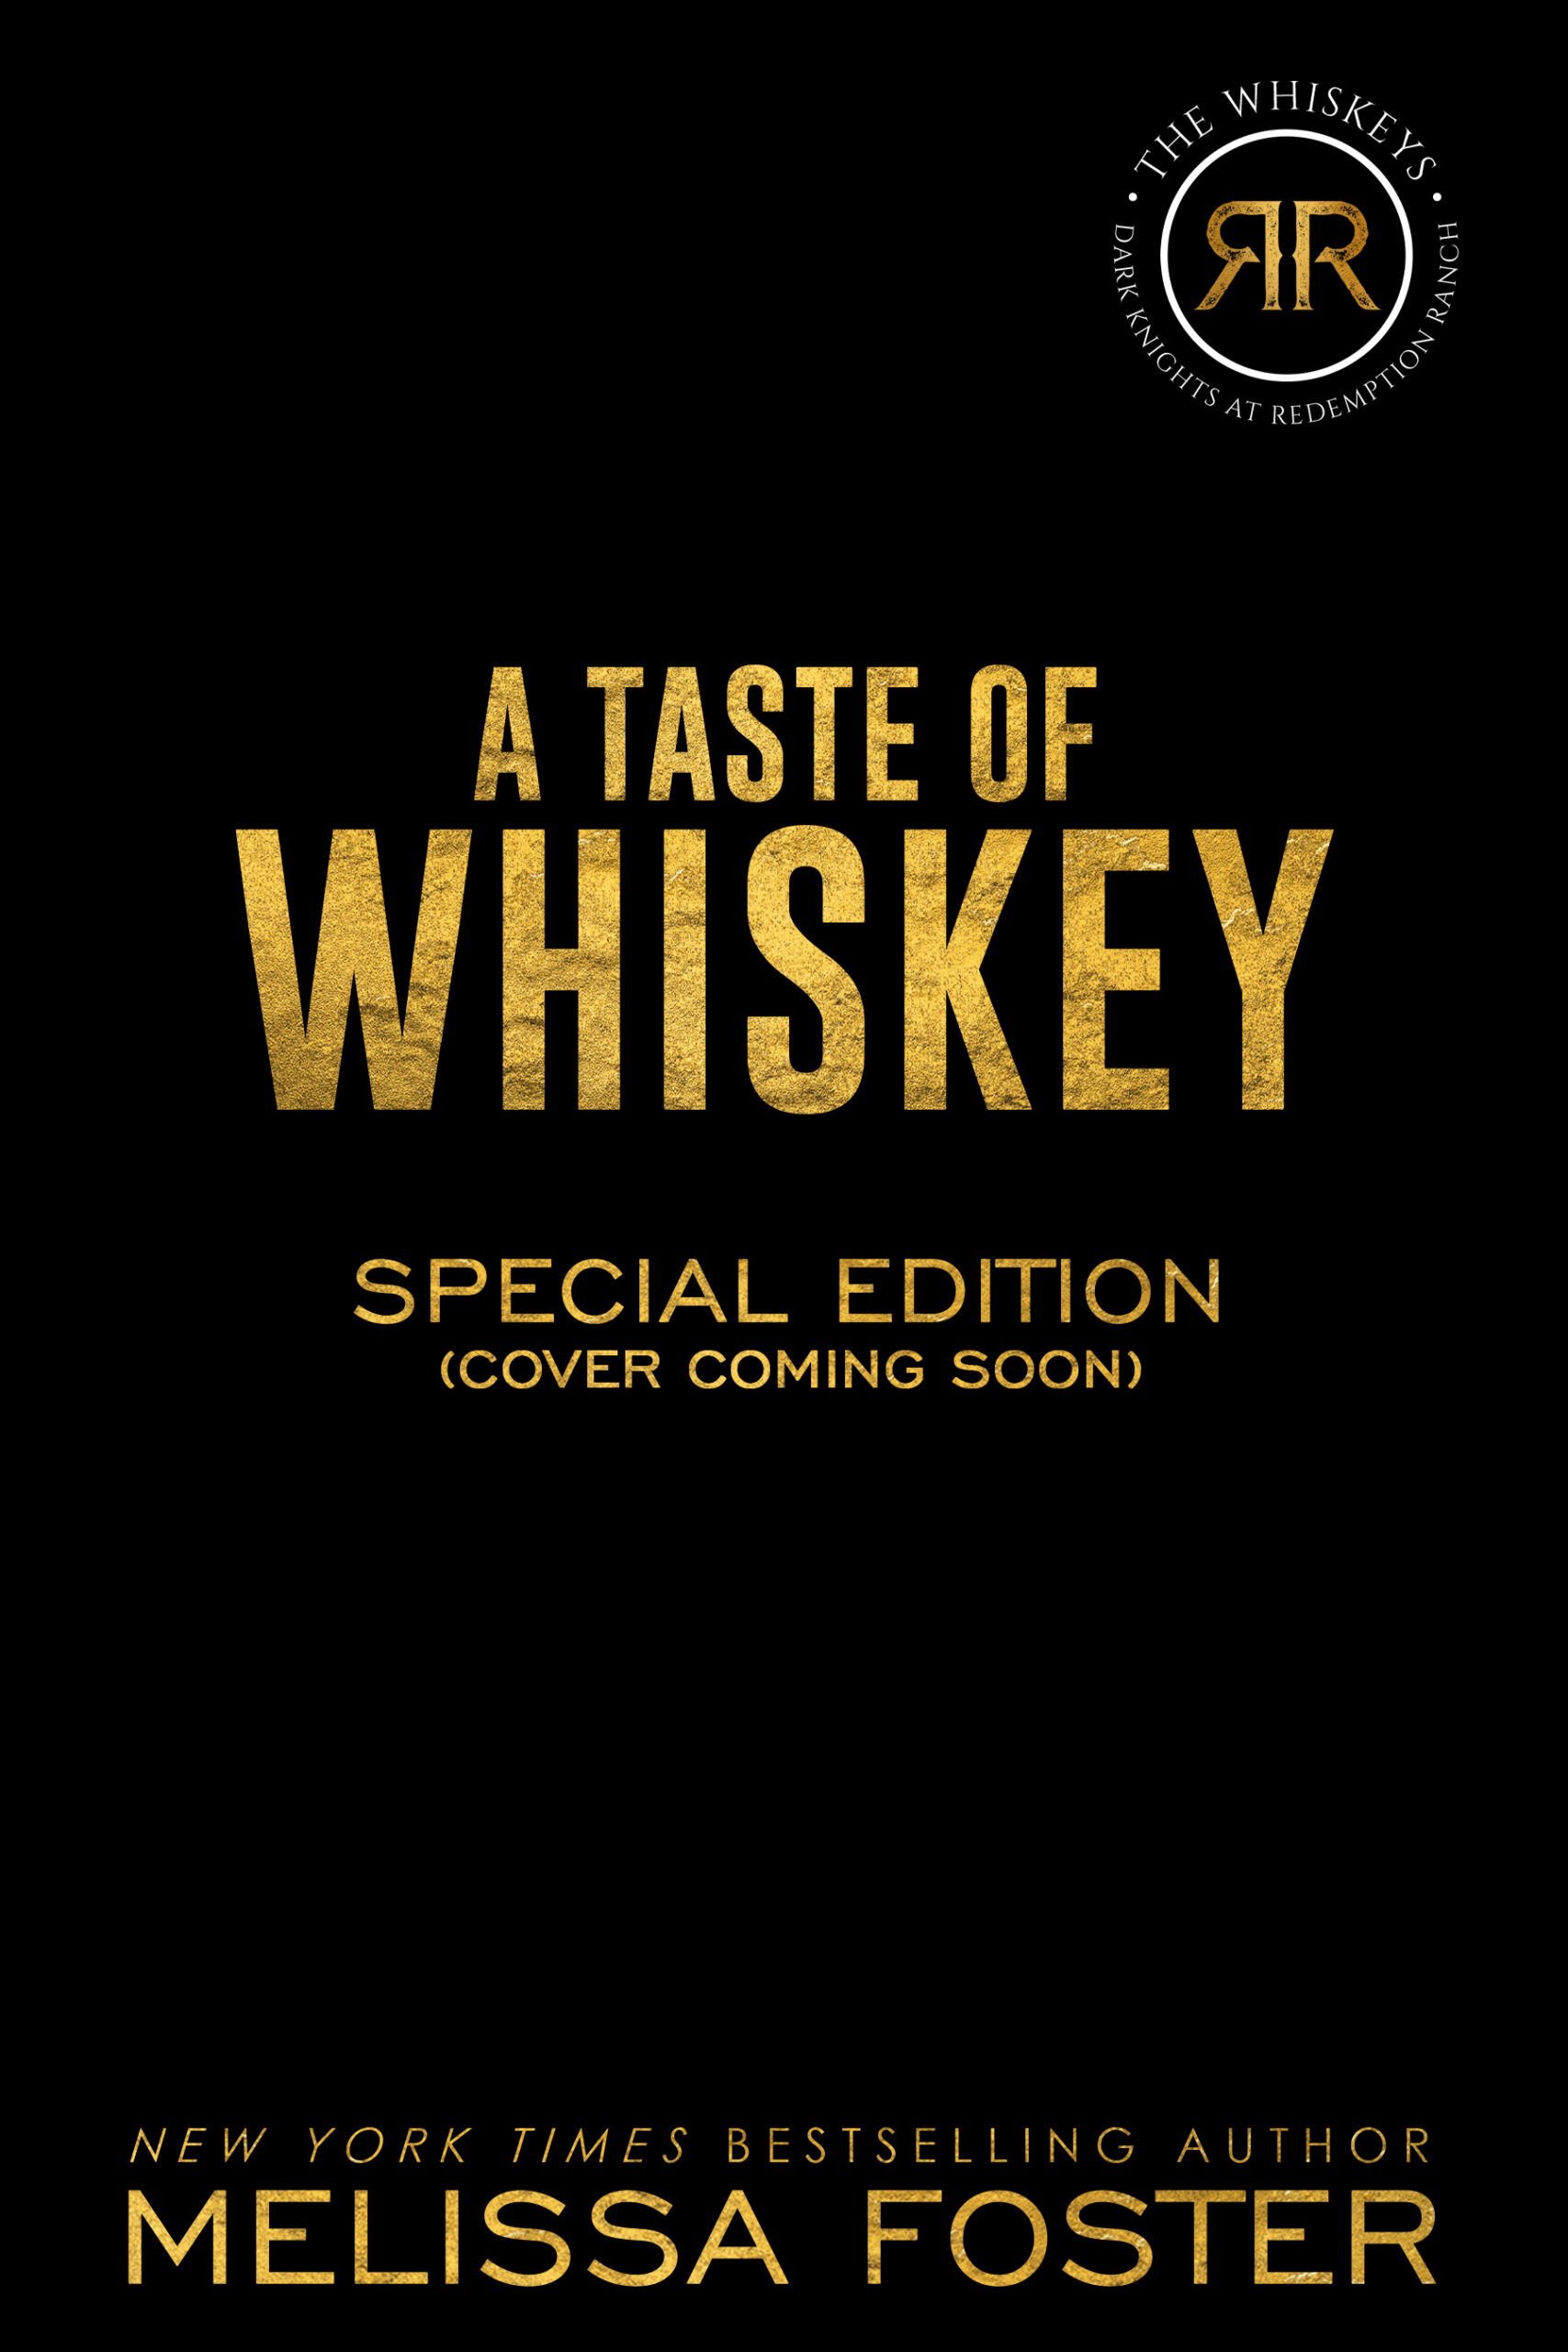 A Taste of Whiskey (Special Edition by Melissa Foster)